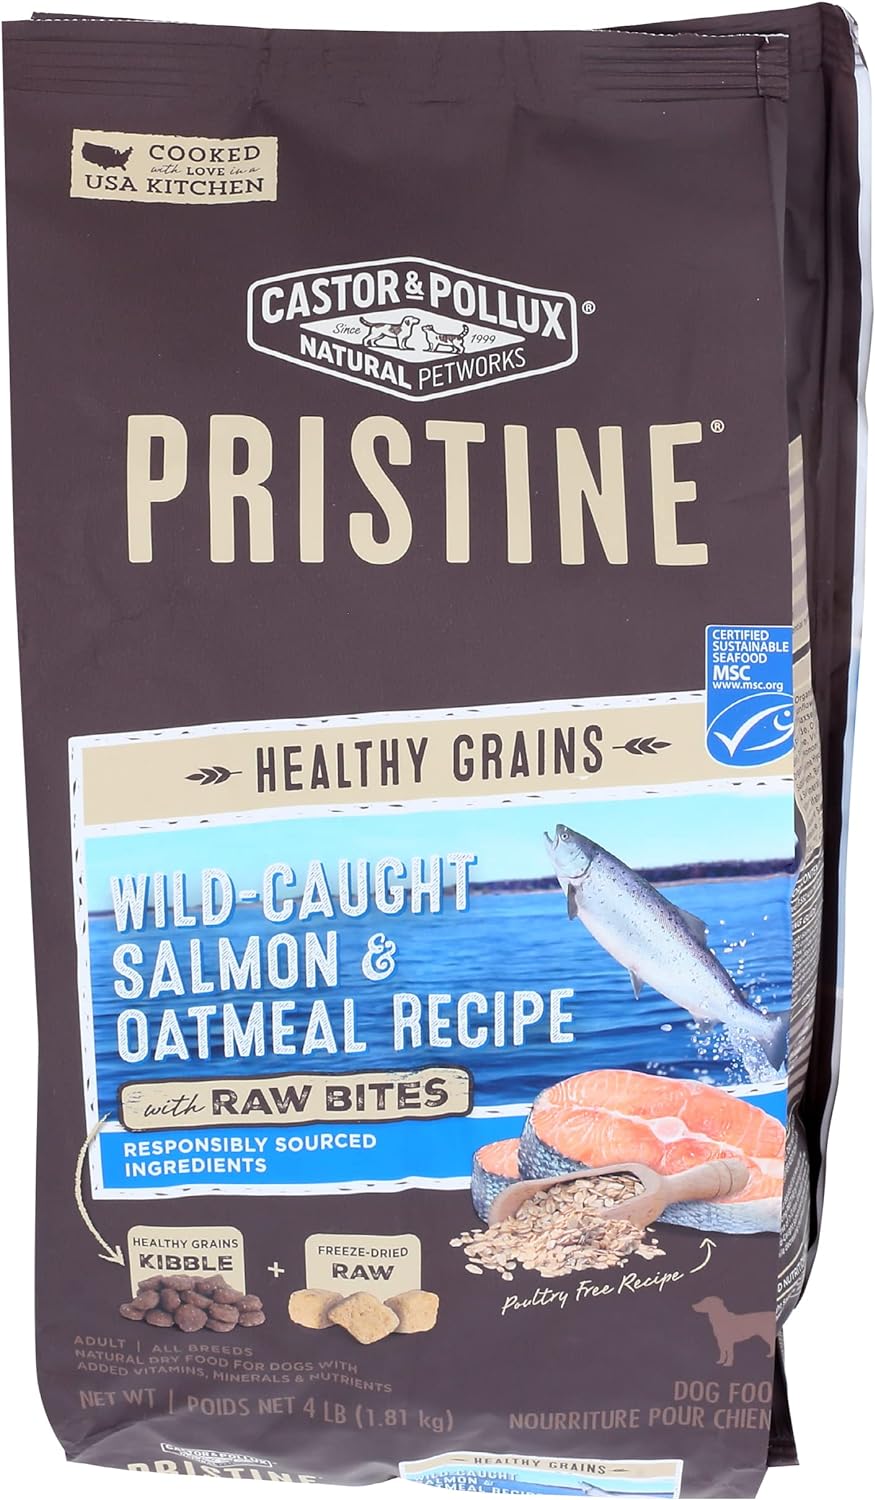 Castor & Pollux Pristine Wild-Caught Salmon & Oatmeal Recipe with Raw Bites Dry Dog Food – Gallery Image 1